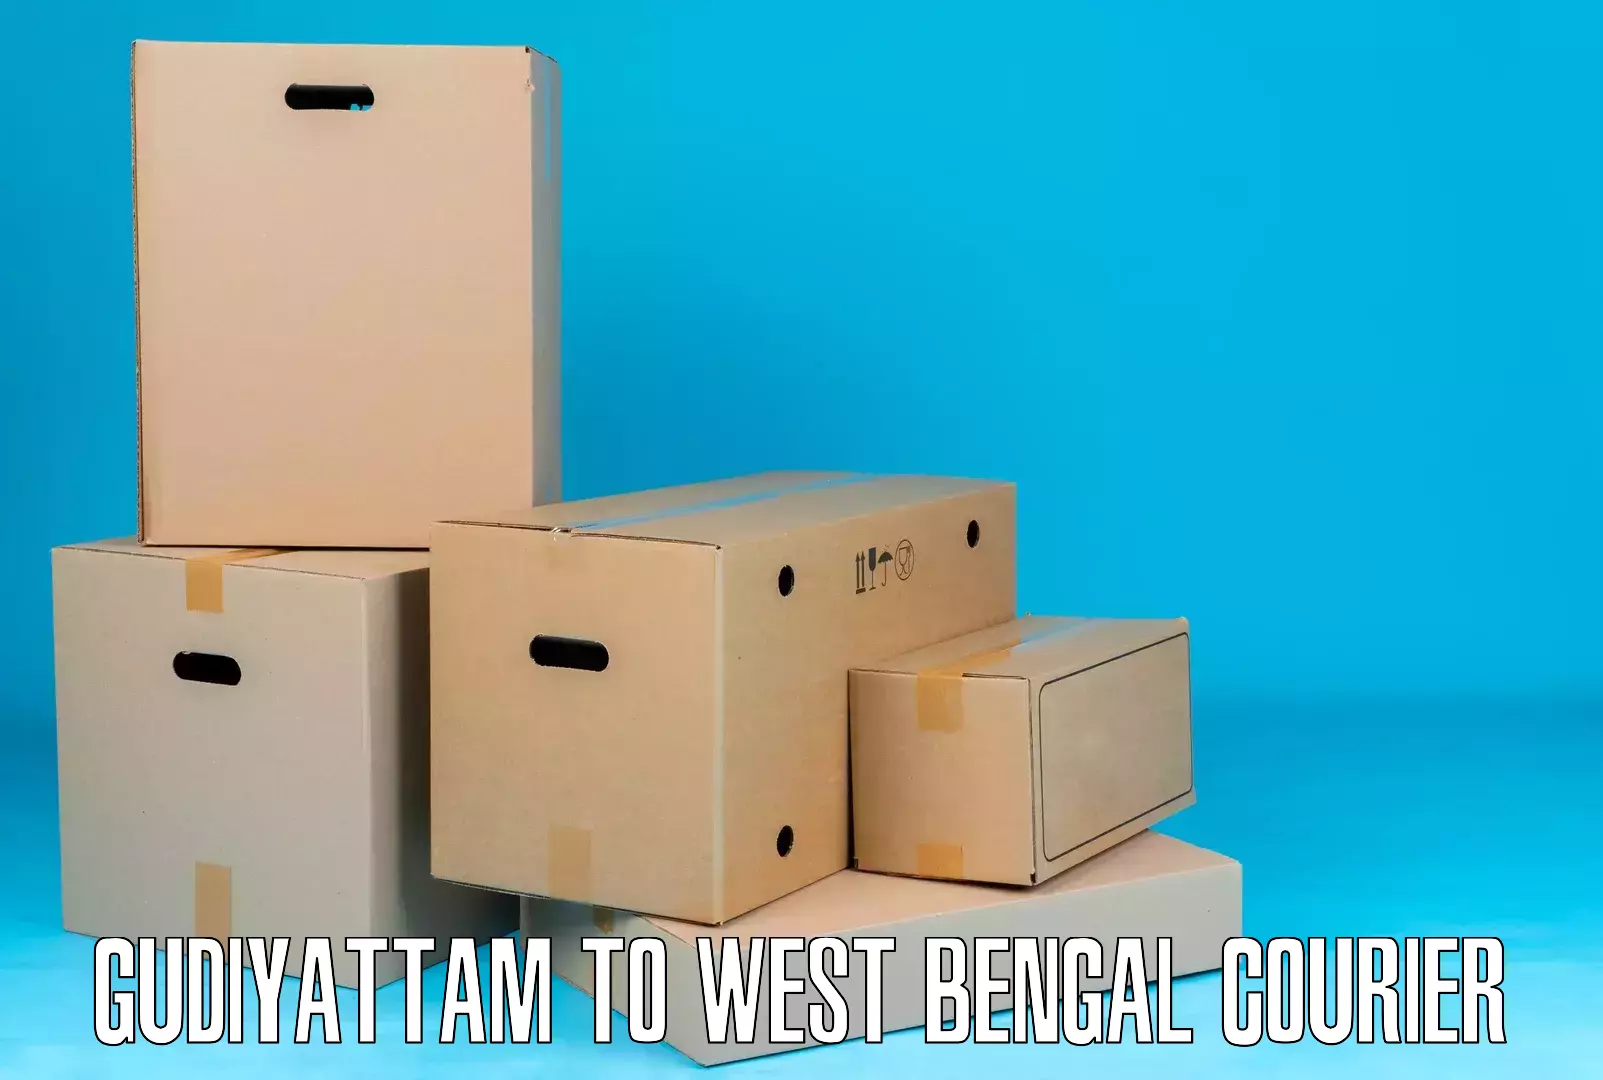 Express delivery solutions Gudiyattam to West Bengal